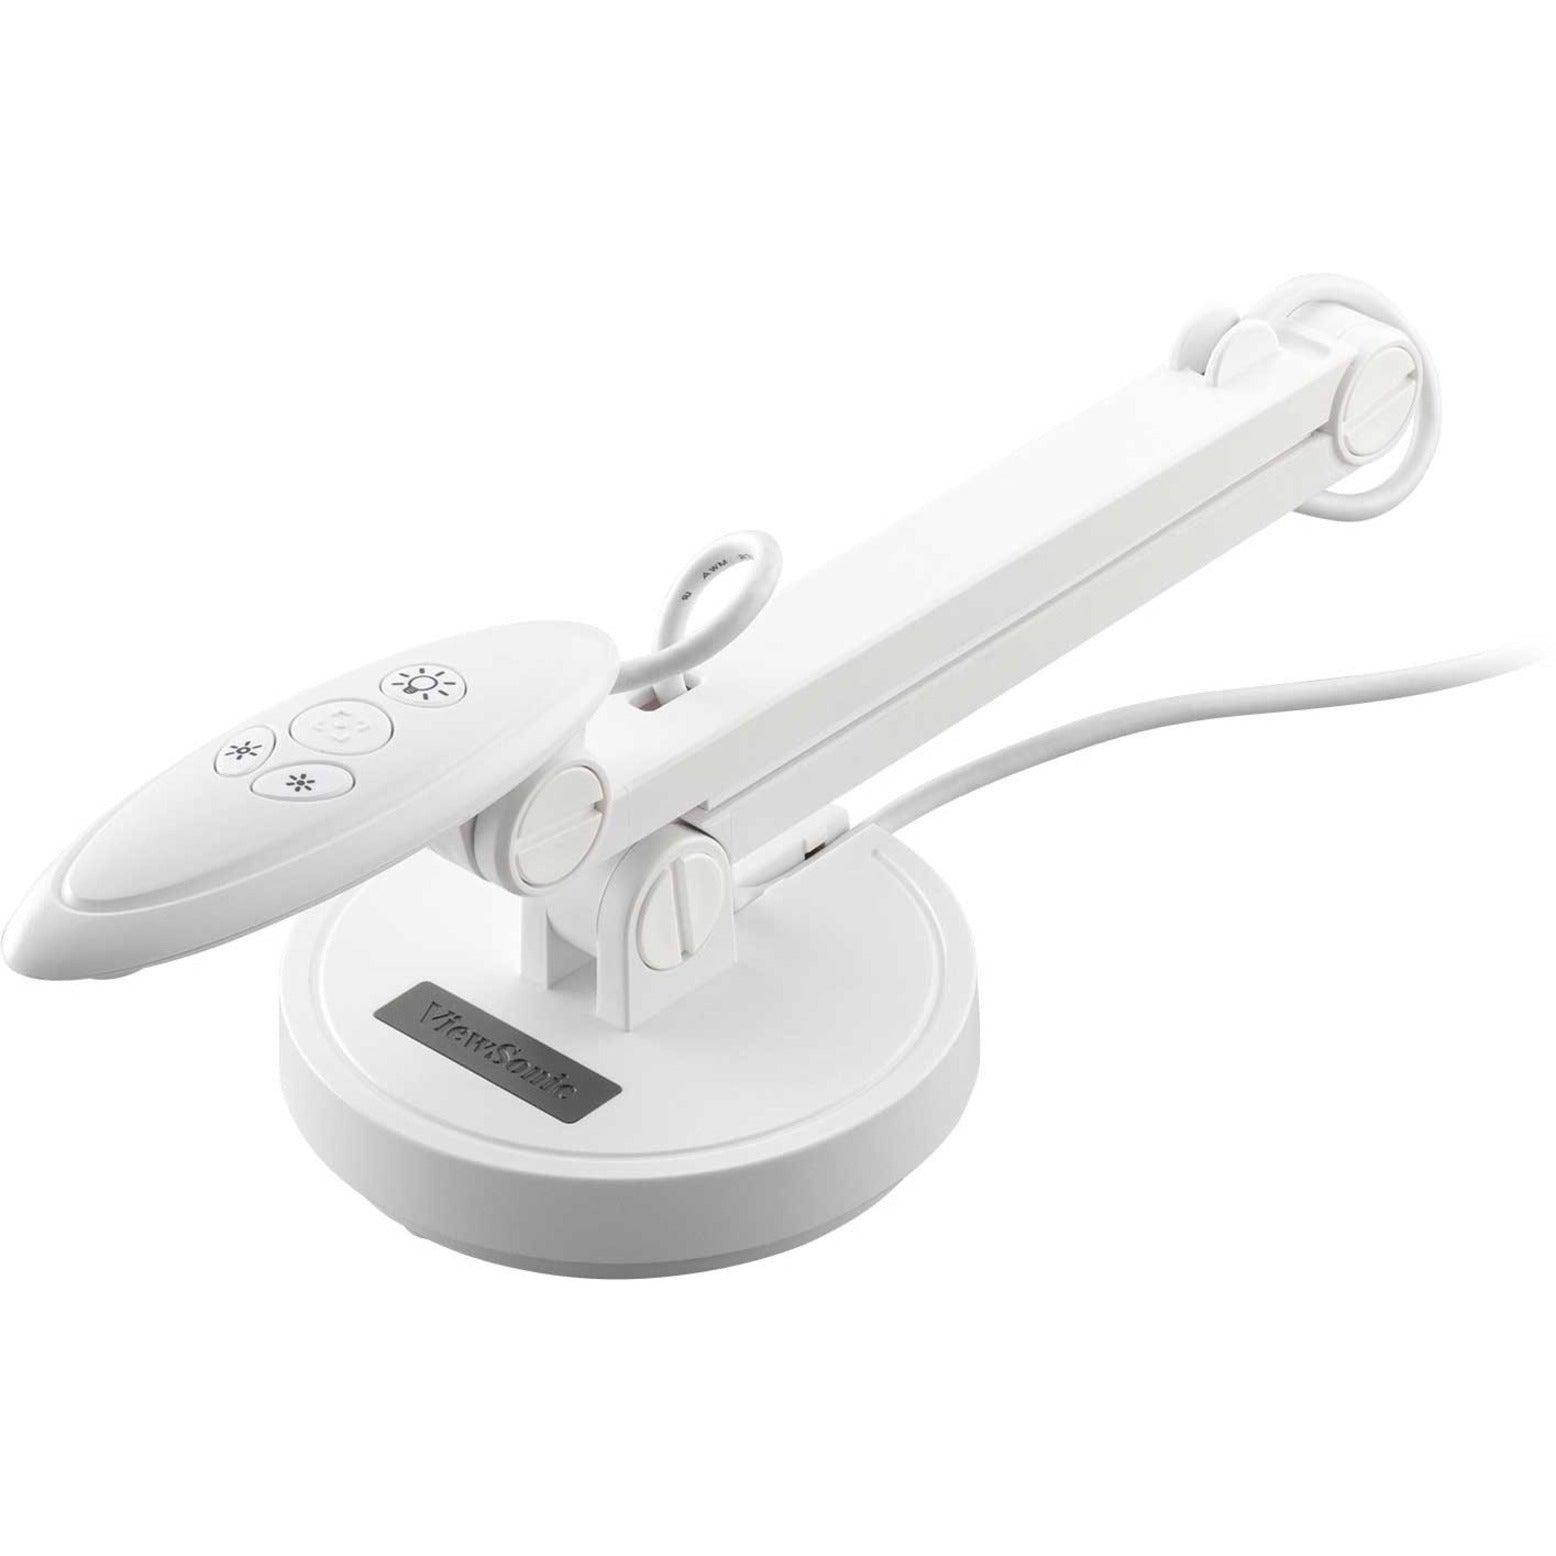 ViewSonic VB-VIS-002 Plug-and-play USB Document Camera, Built-in LED, Auto Focus, 8 Megapixel, Color, 30 fps